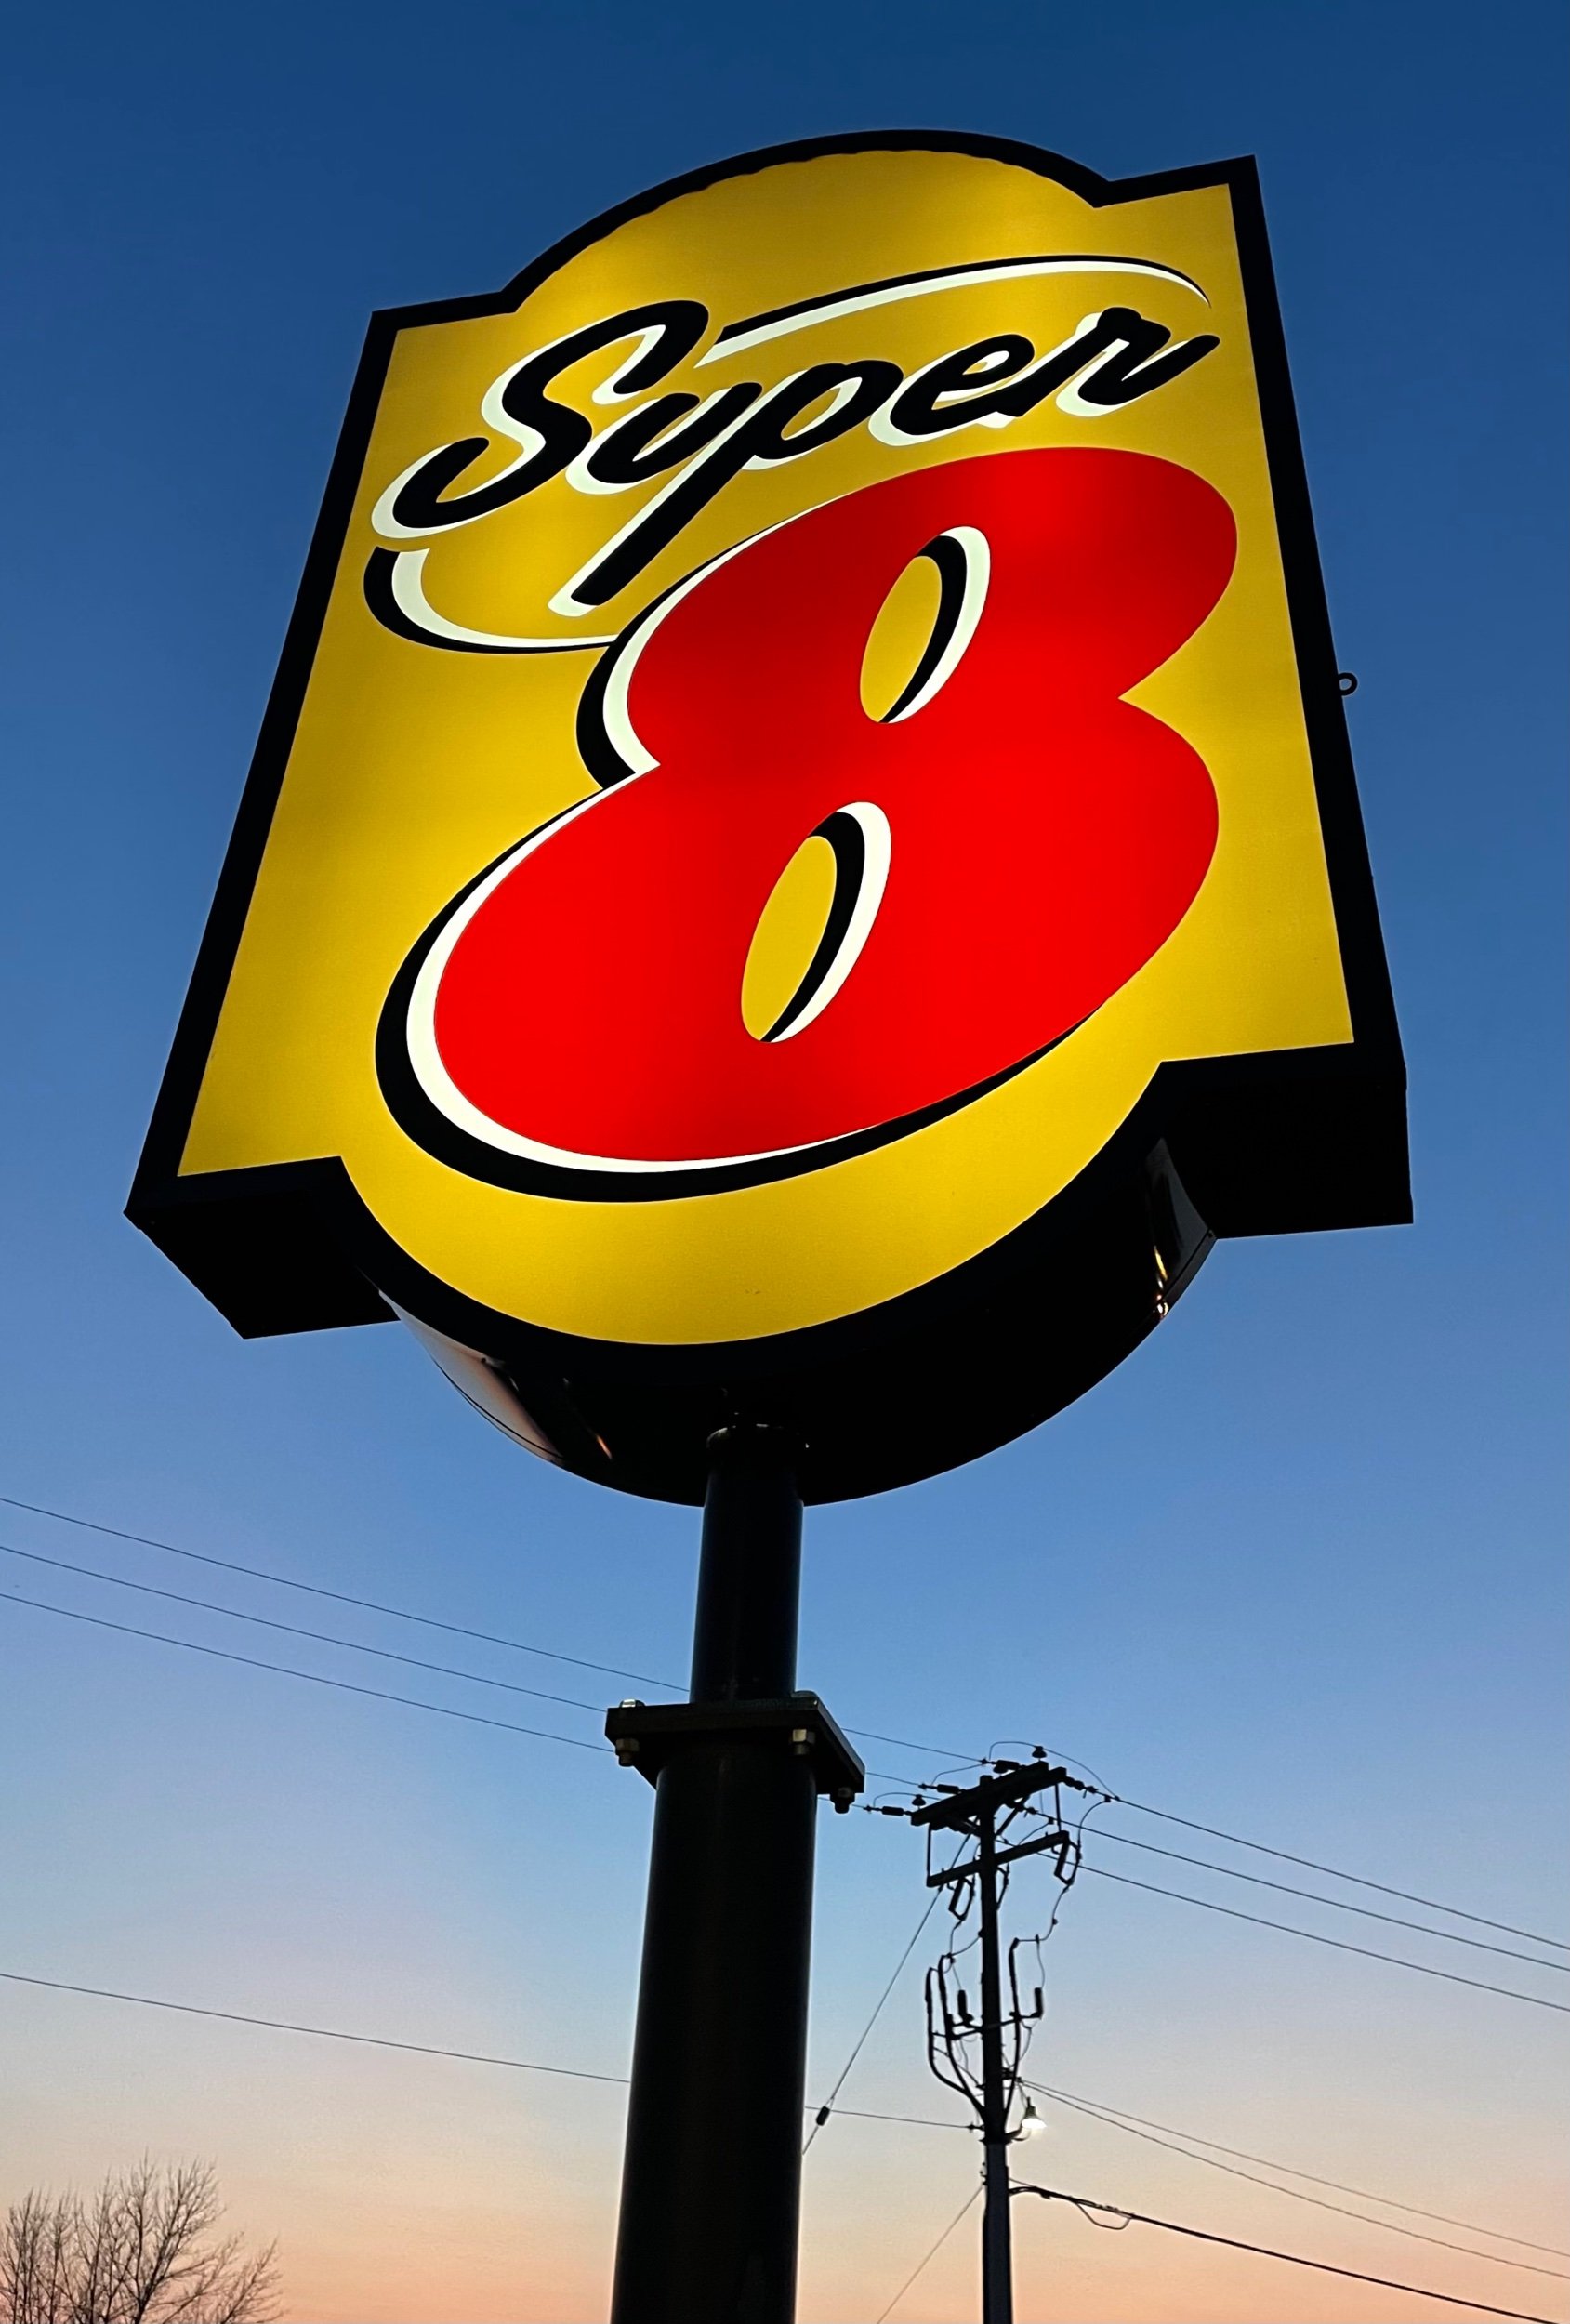  If you’ve met composer Alex Temple, you know she’s fascinated by commercial culture…well, culture in general…and she was stopped dead in her tracks by the sheer size of this Super 8 sign. 